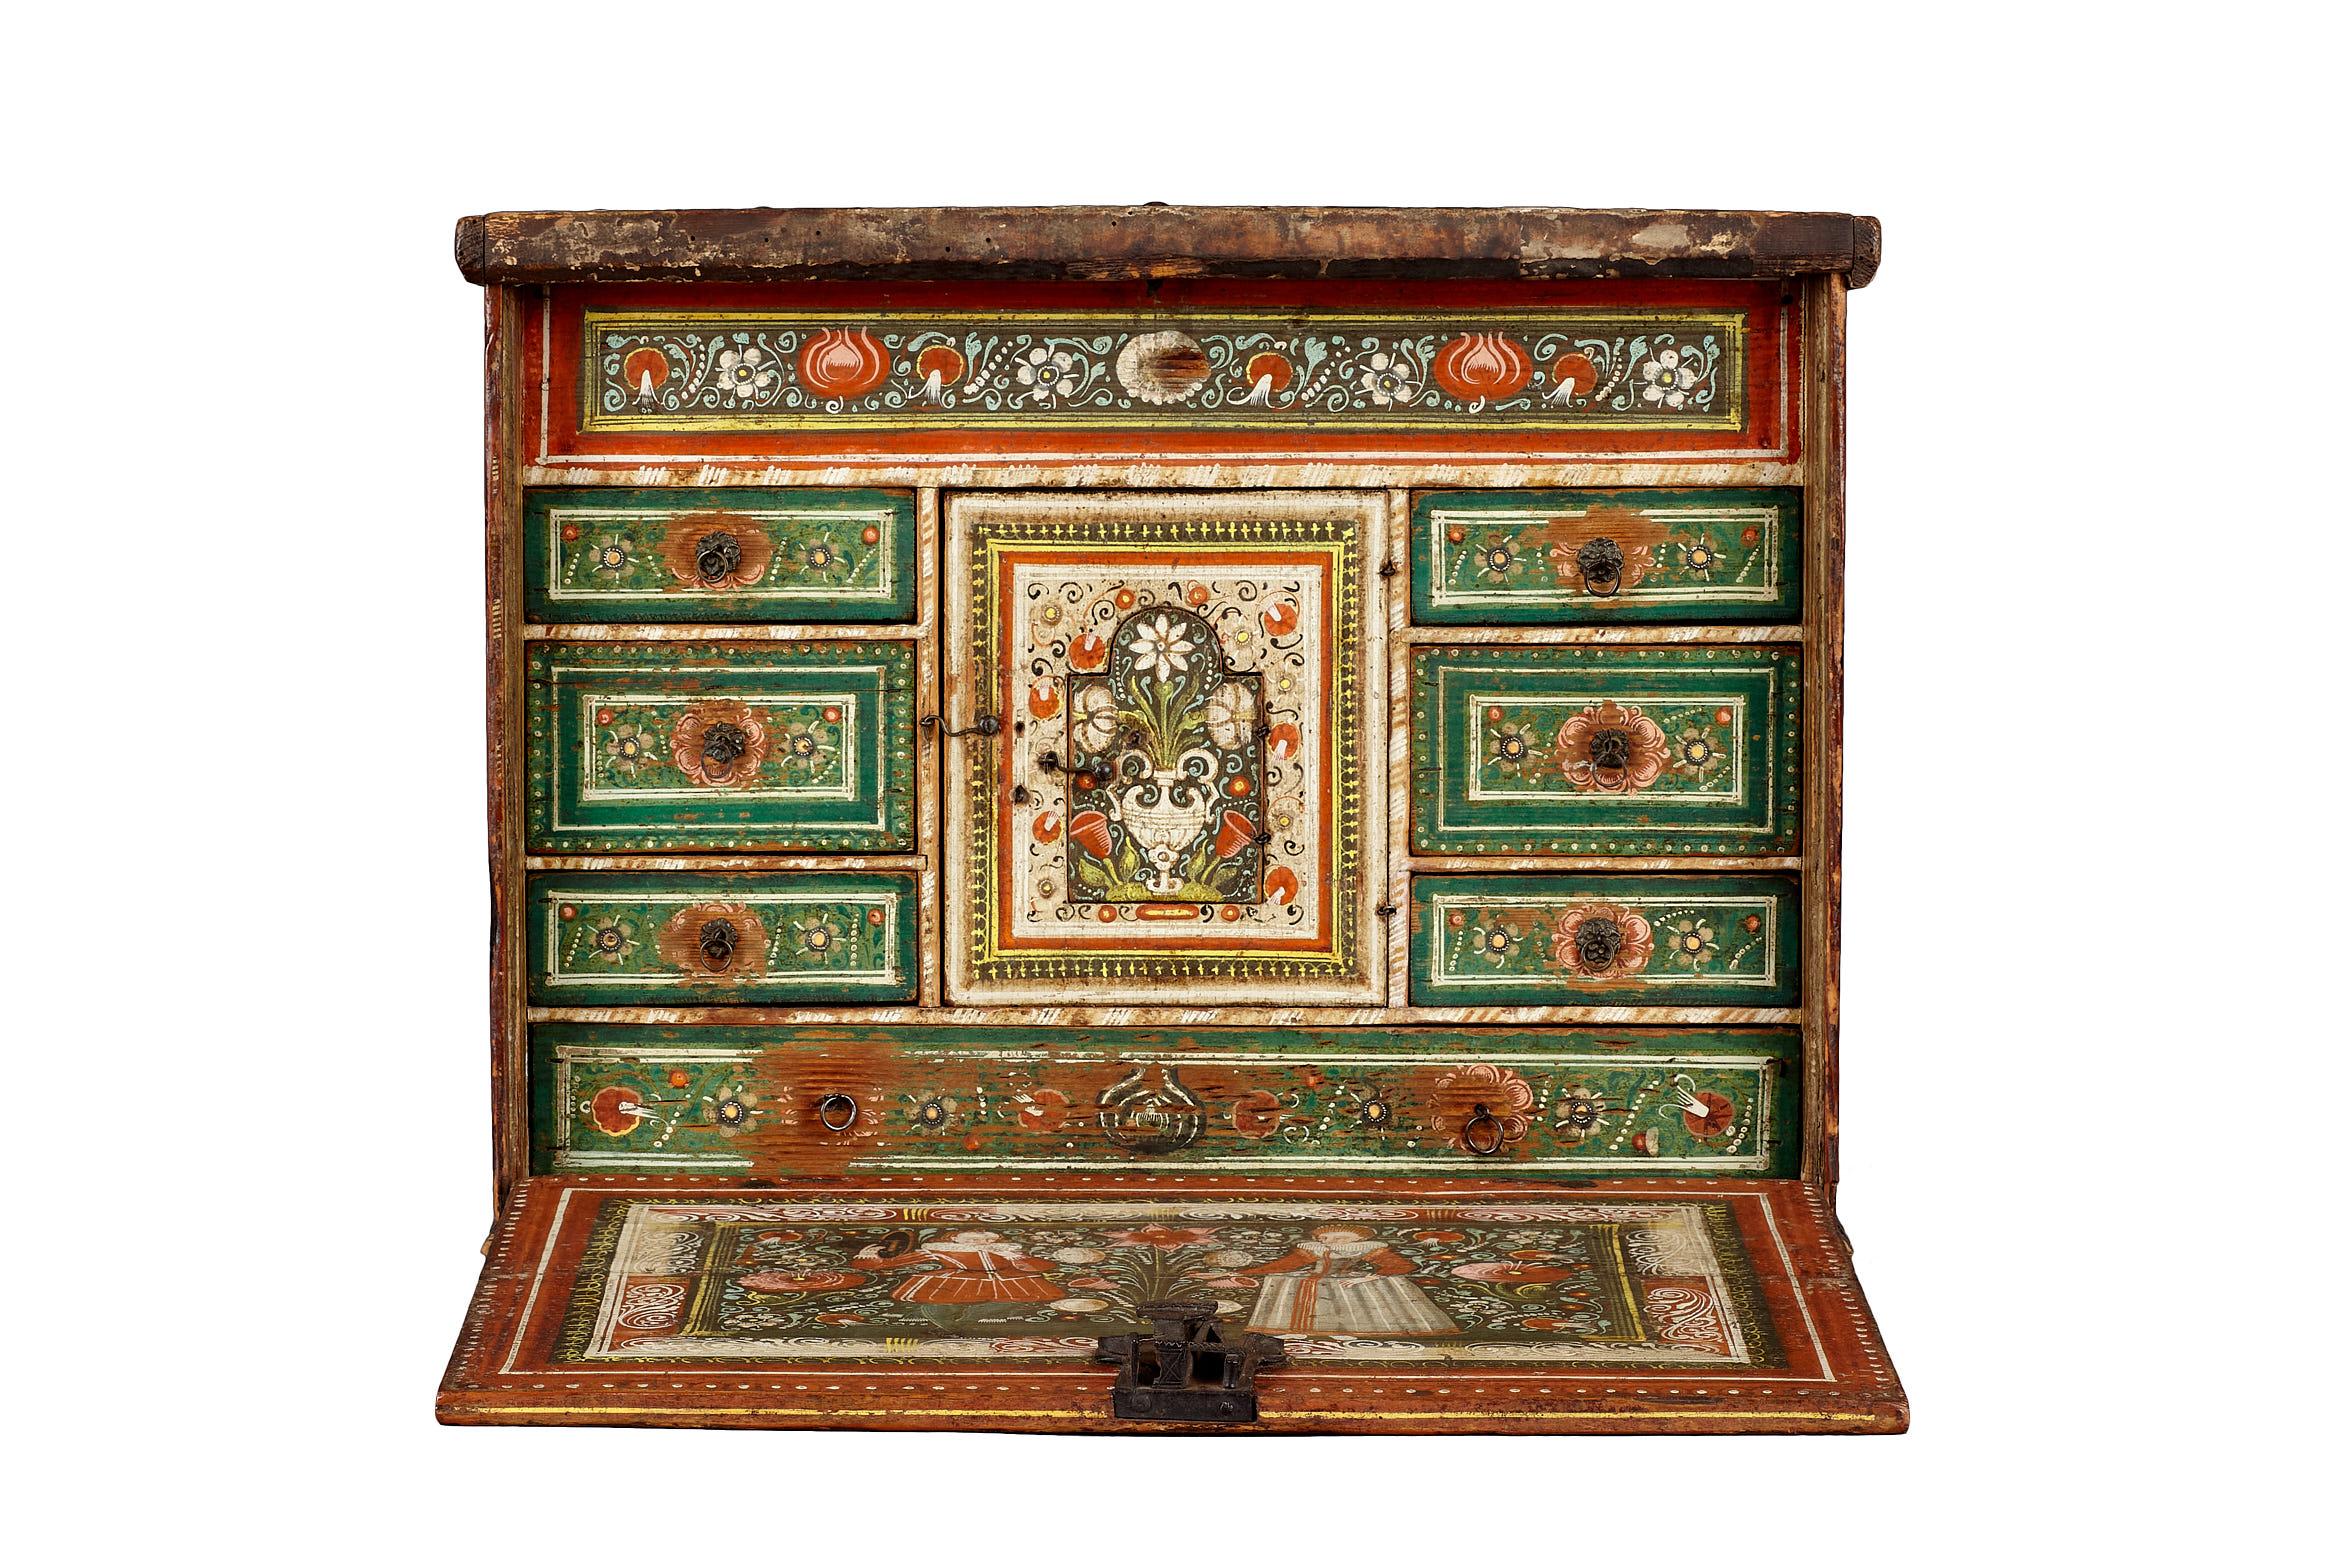 Polychromed Elizabethan Polychrome Painted Marriage Cabinet, German, circa 1580-1600